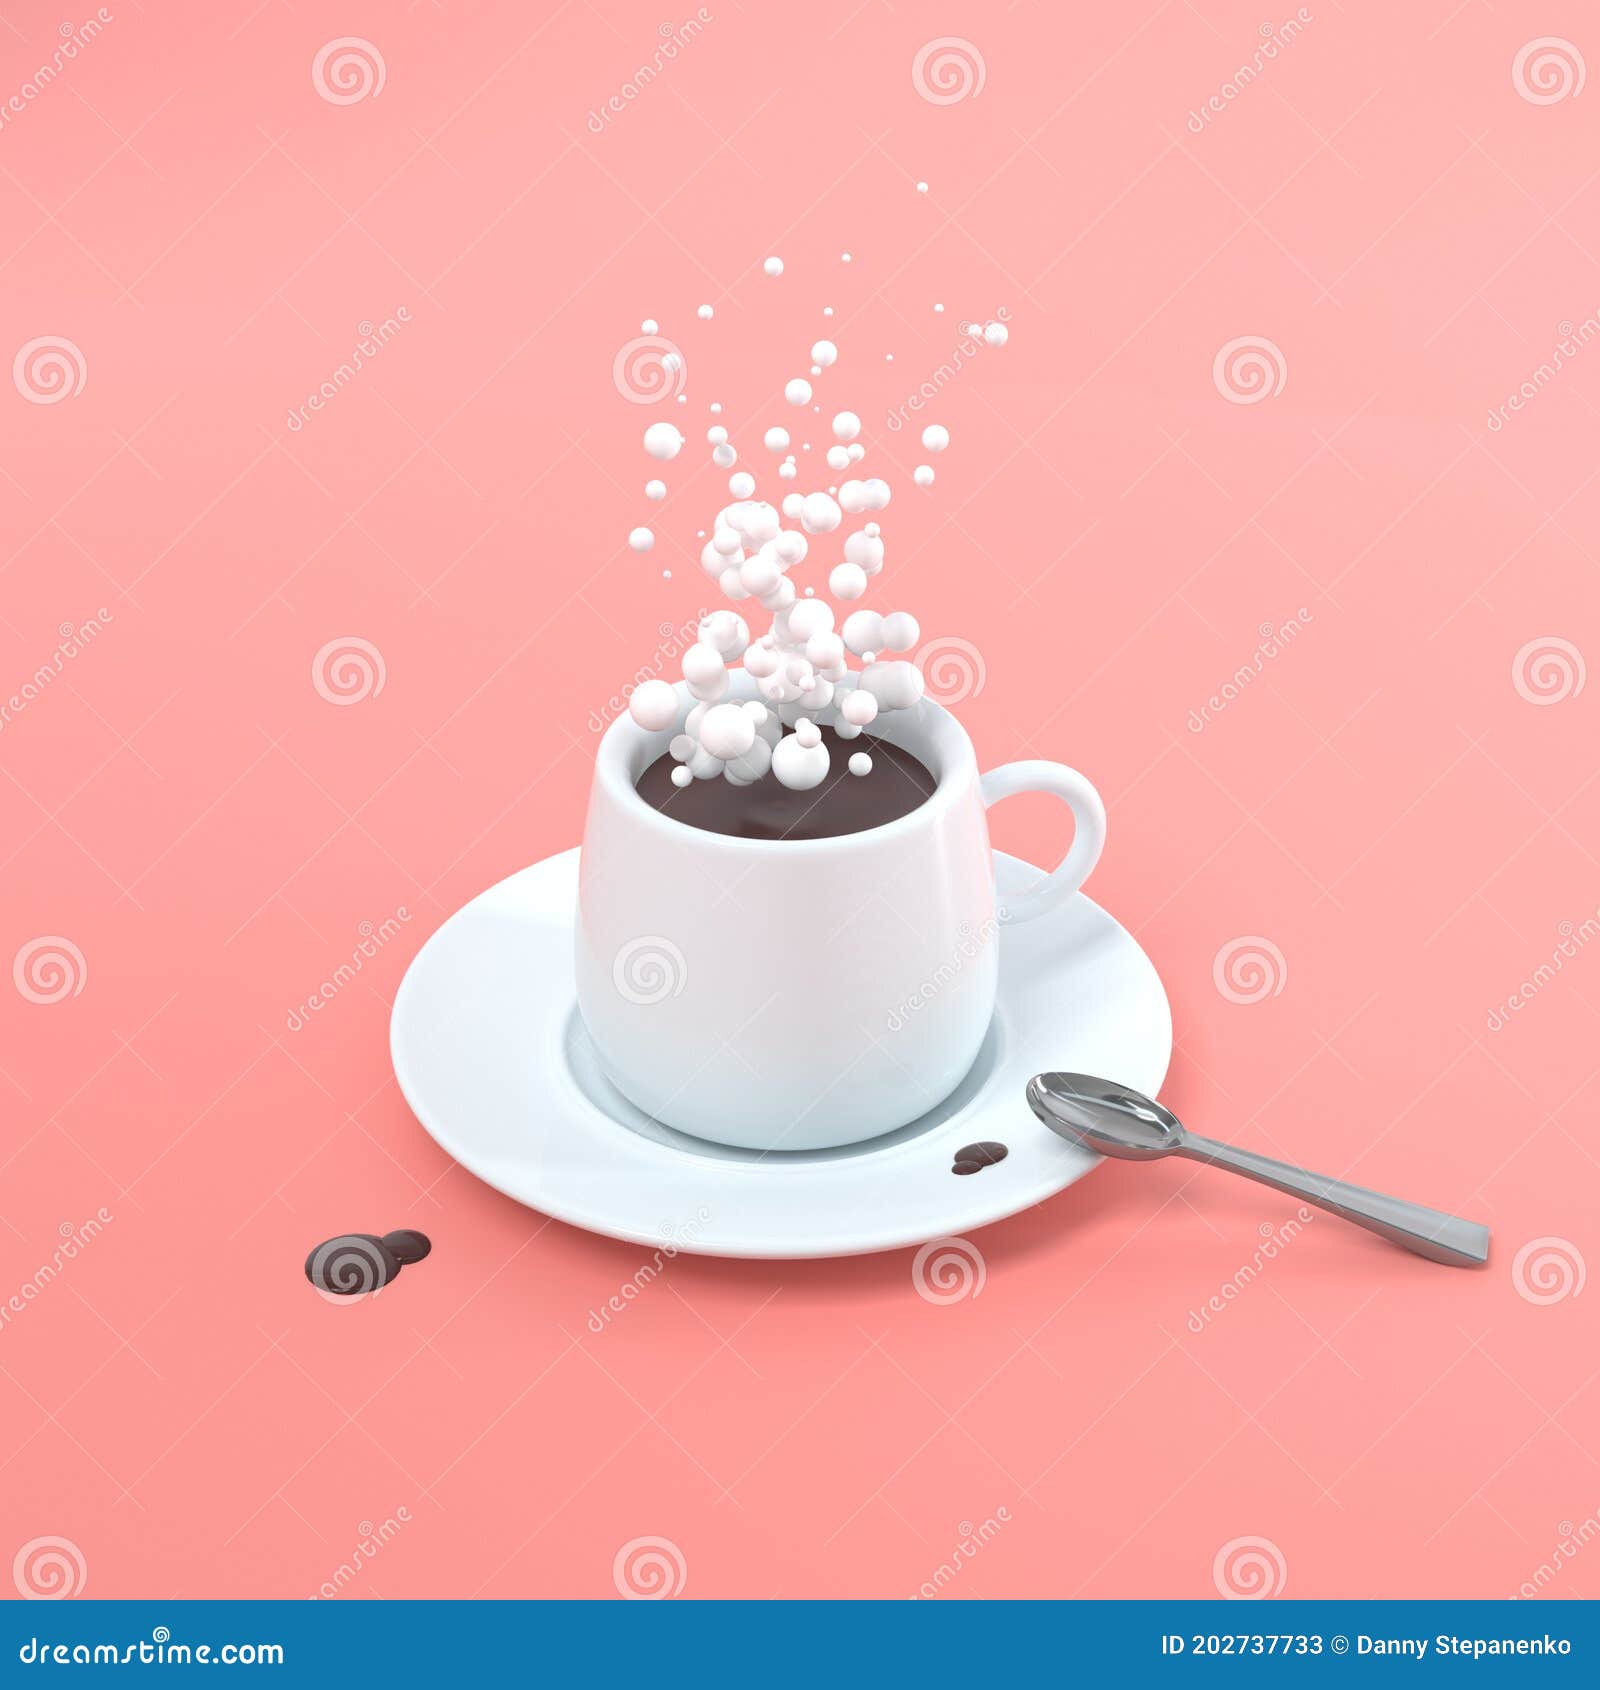 3d Cartoon Quick Breakfast, a Hot Coffee Set, Hot Chocolate, Tea with Spoon  on Pastel Pink Background. Coffee Break Time Stock Illustration -  Illustration of design, decoration: 202737733